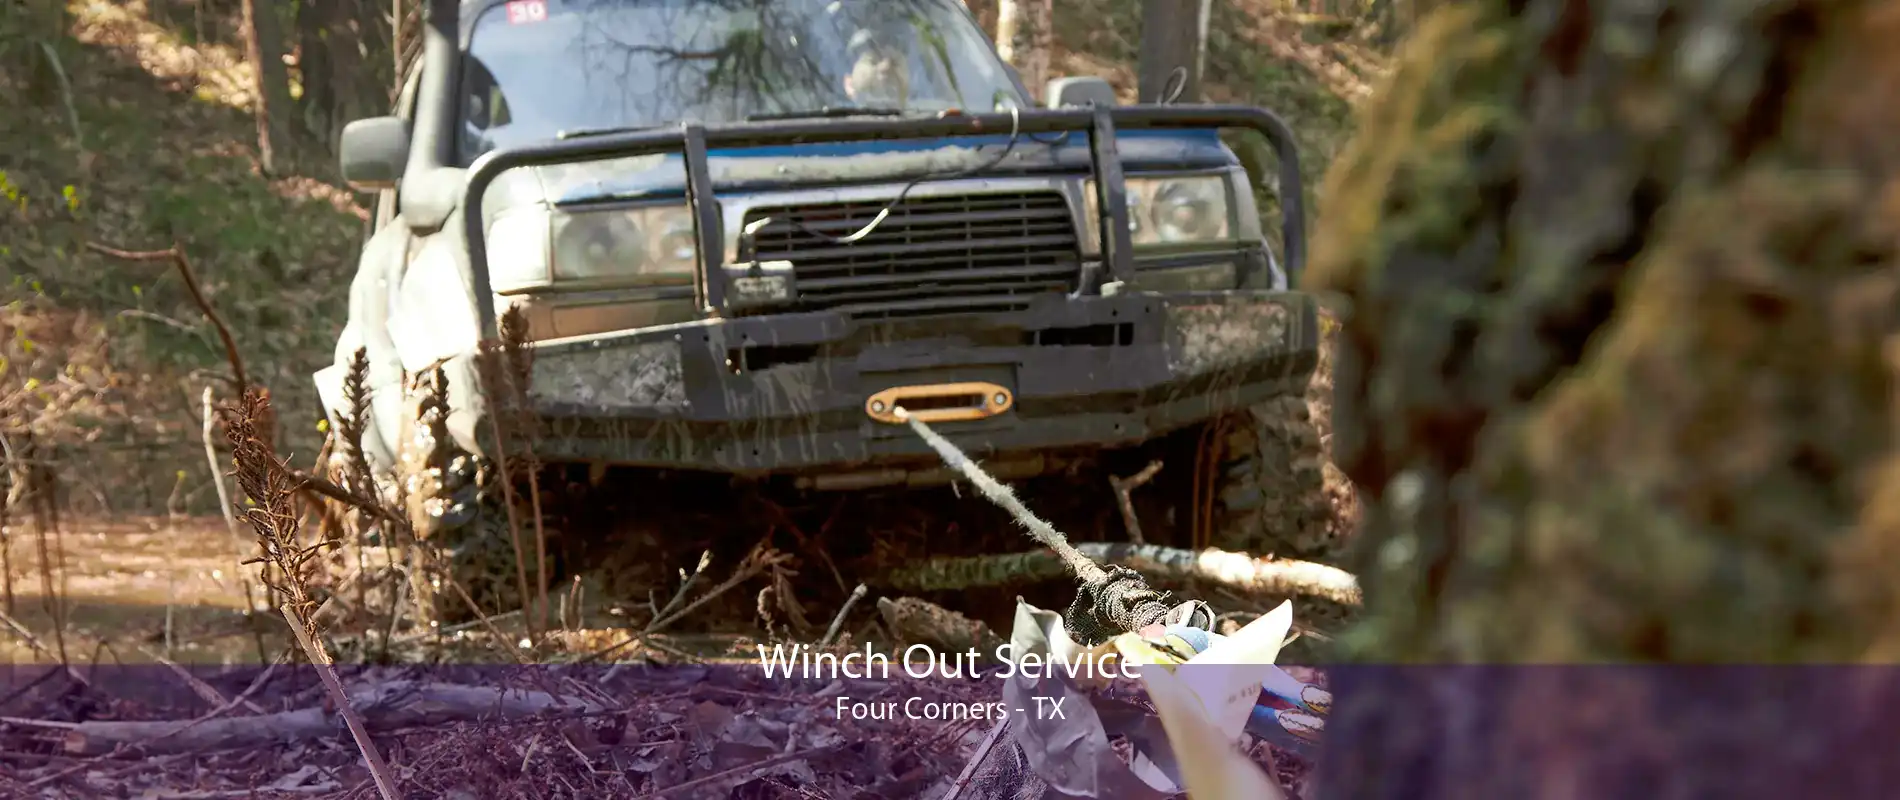 Winch Out Service Four Corners - TX